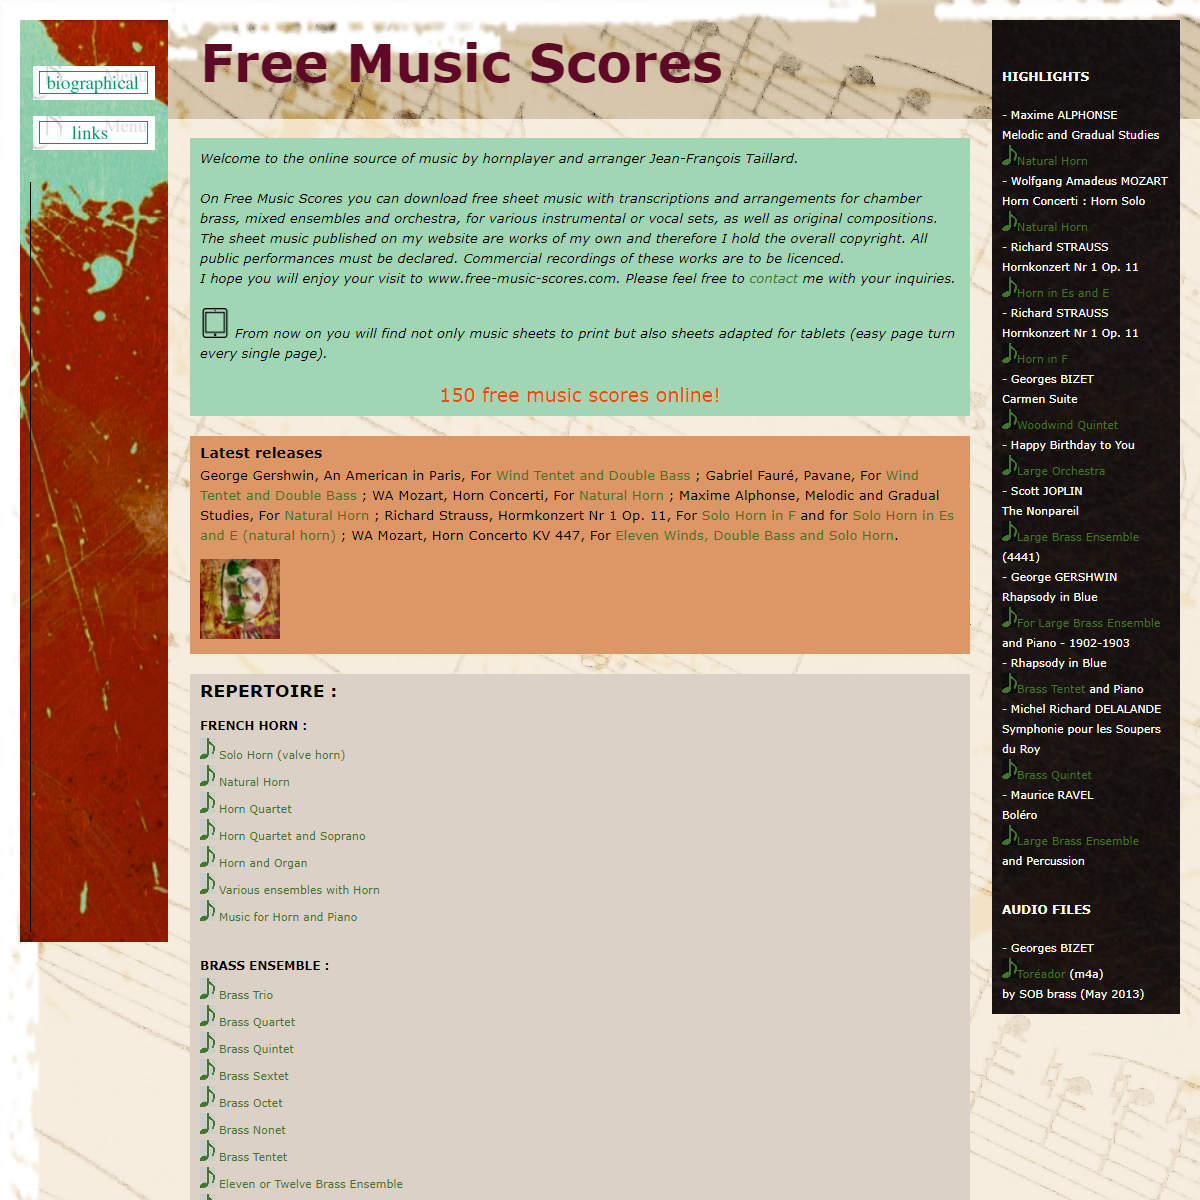 A complete backup of http://free-music-scores.com/